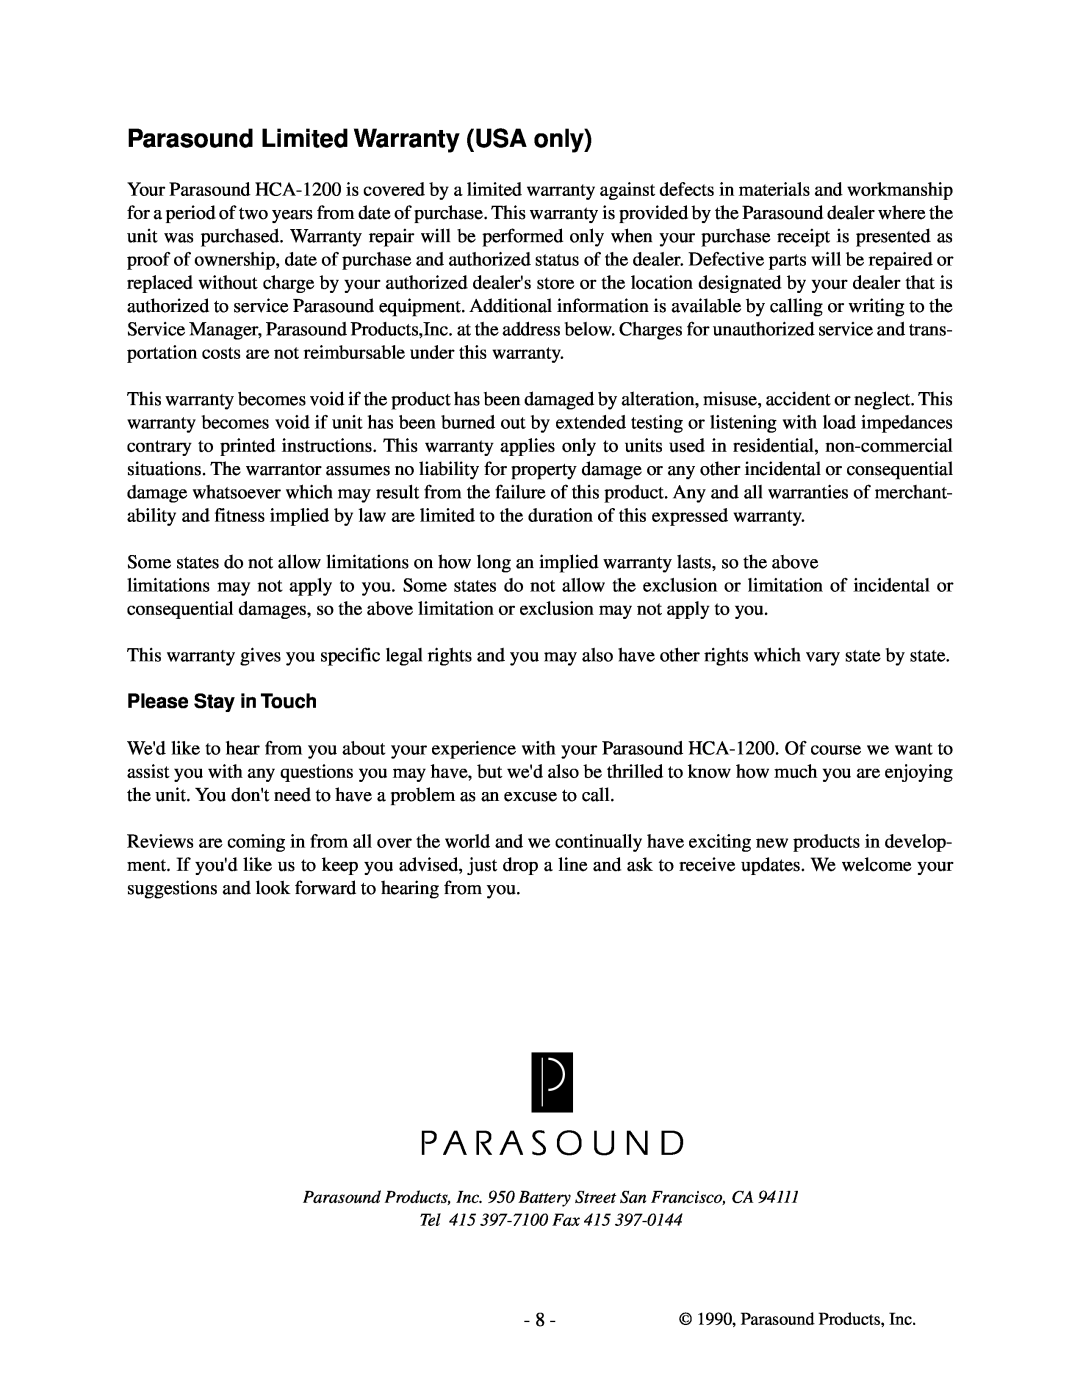 Parasound HCA-1200 owner manual Parasound Limited Warranty USA only, Please Stay in Touch 